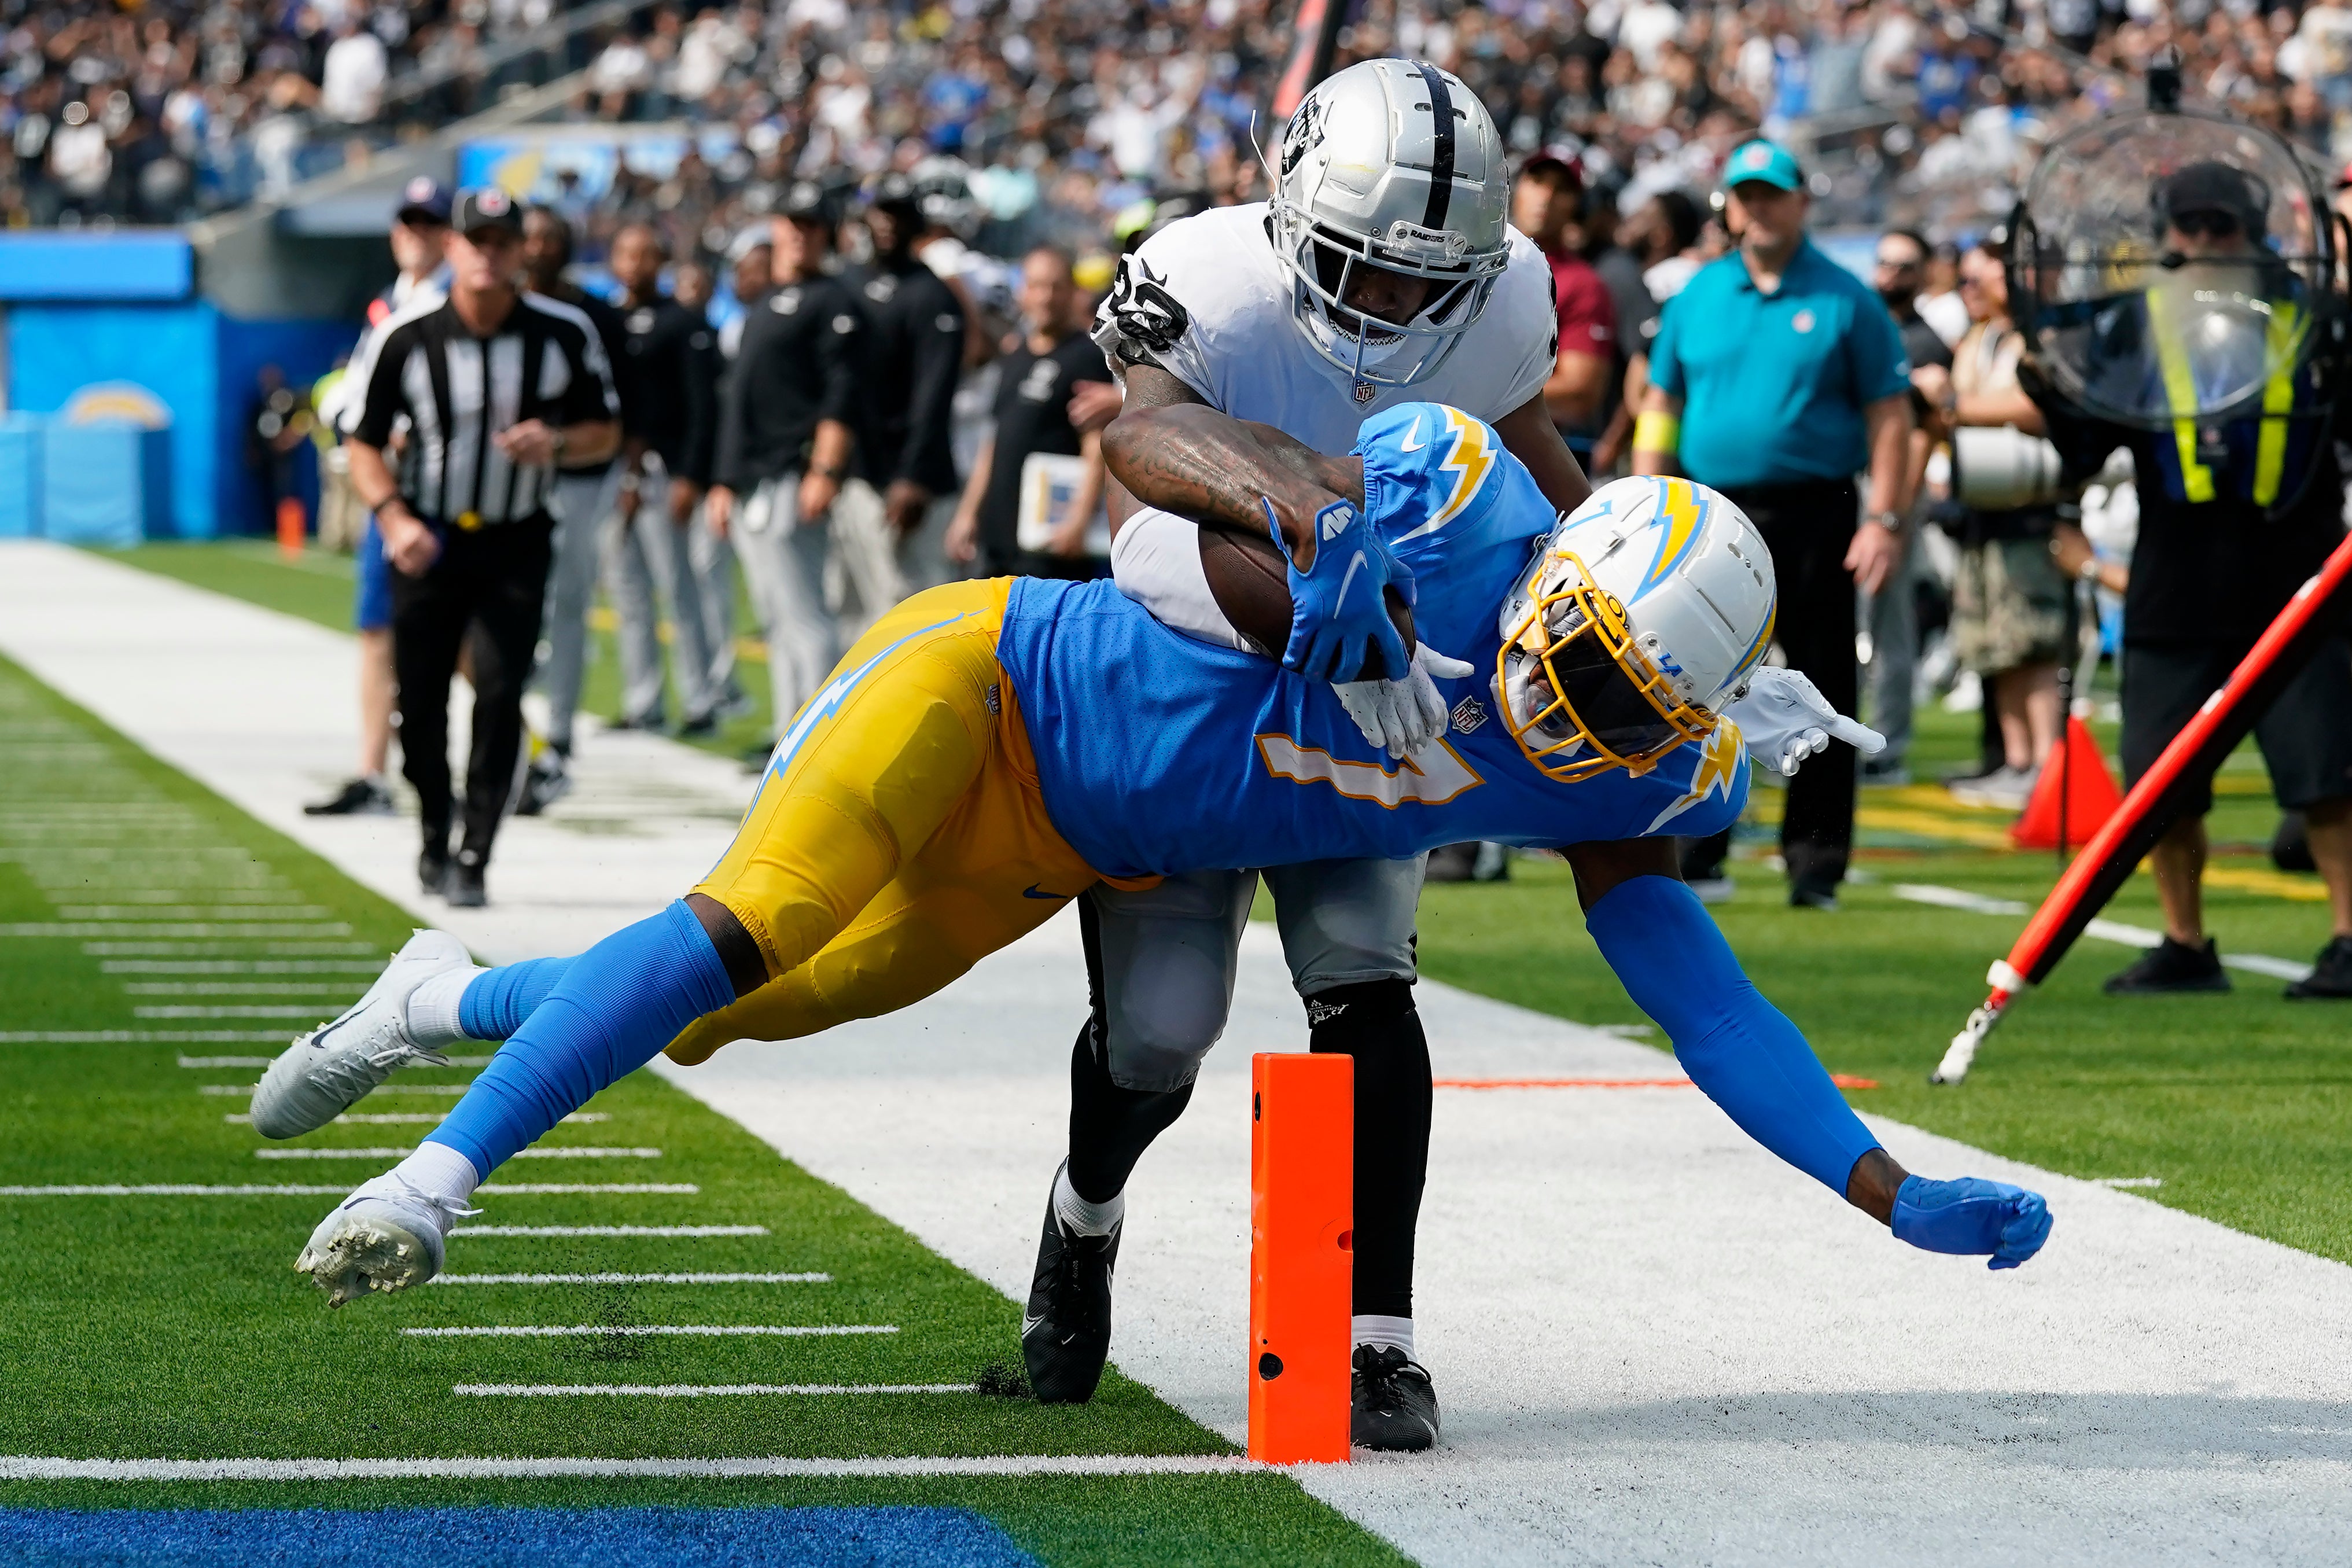 RAIDERS-CHARGERS